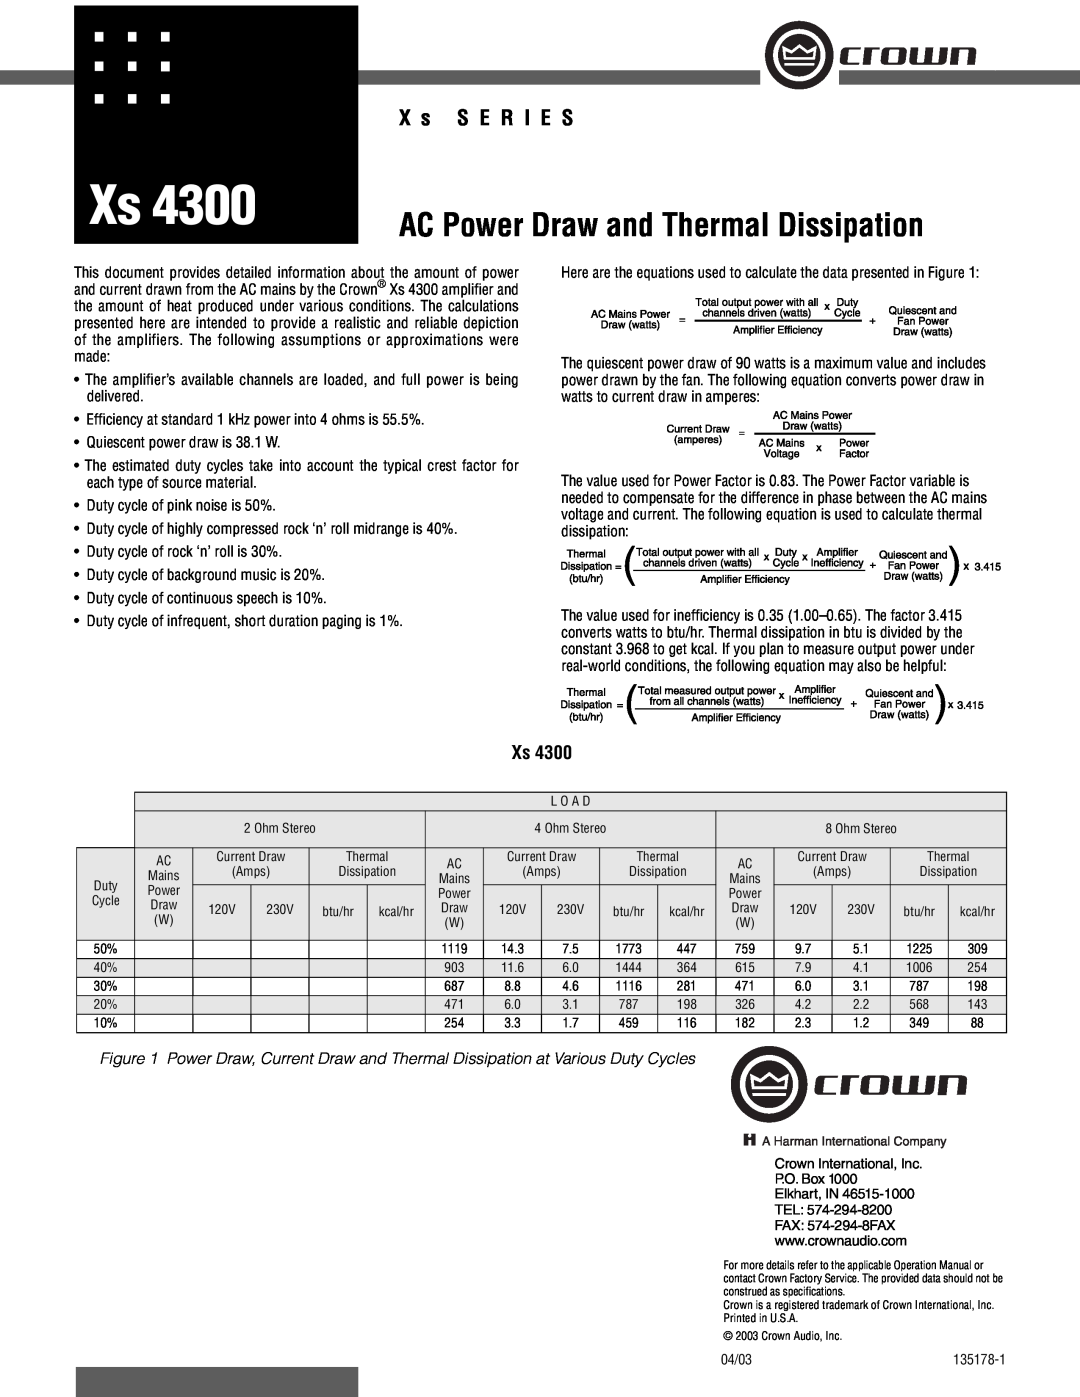 Crown Audio 4300 operation manual AC Power Draw and Thermal Dissipation, X s S E R I E S 